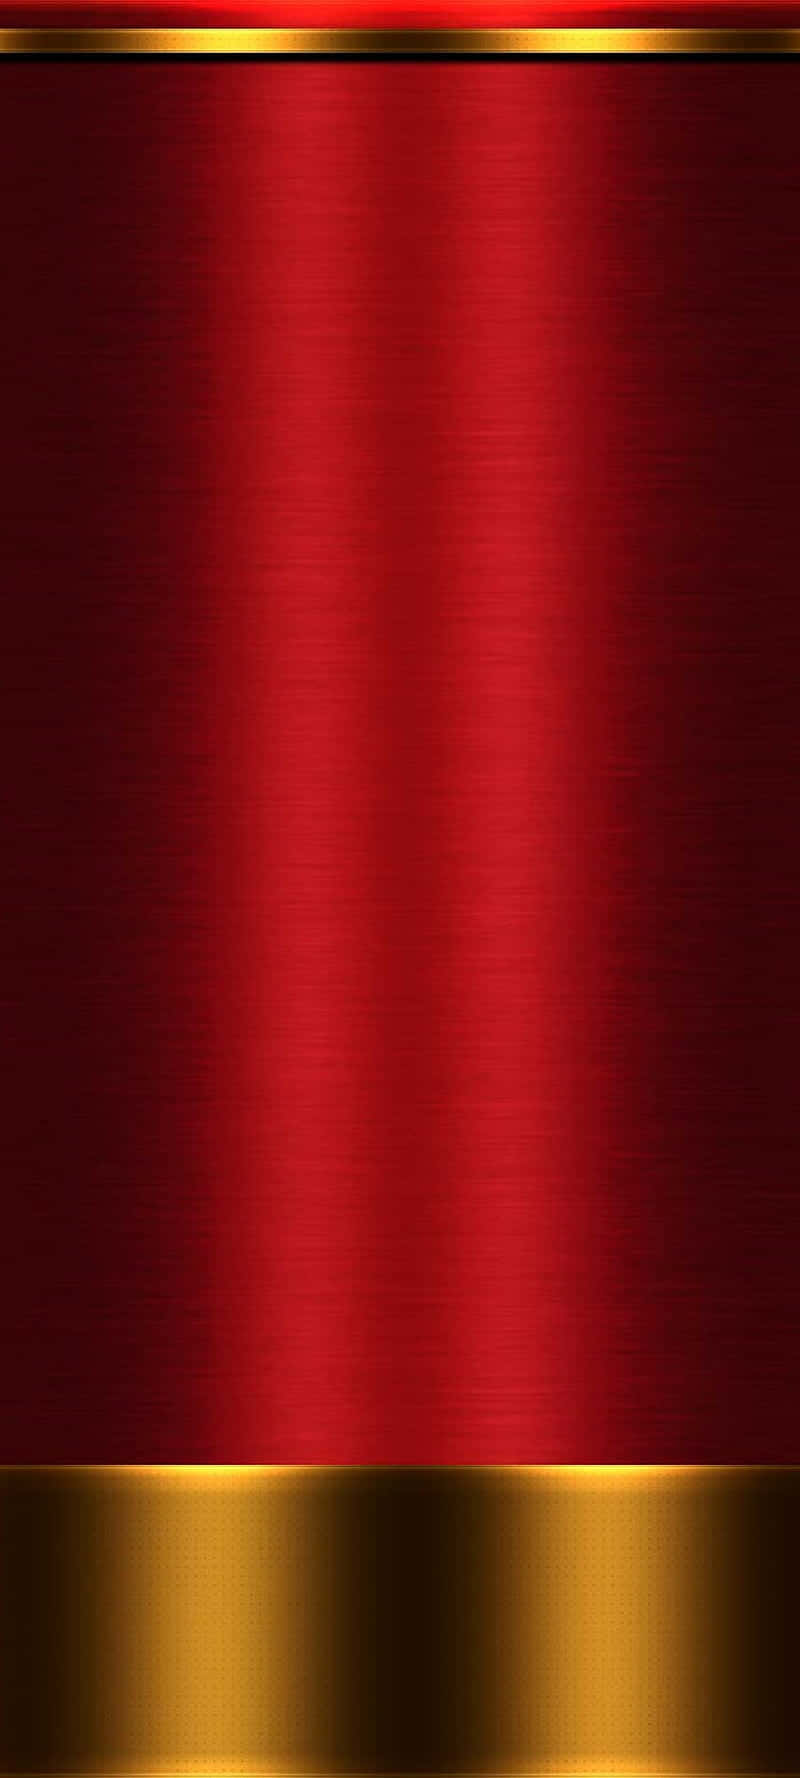 Bright, Bold Red and Gold Abstract Background